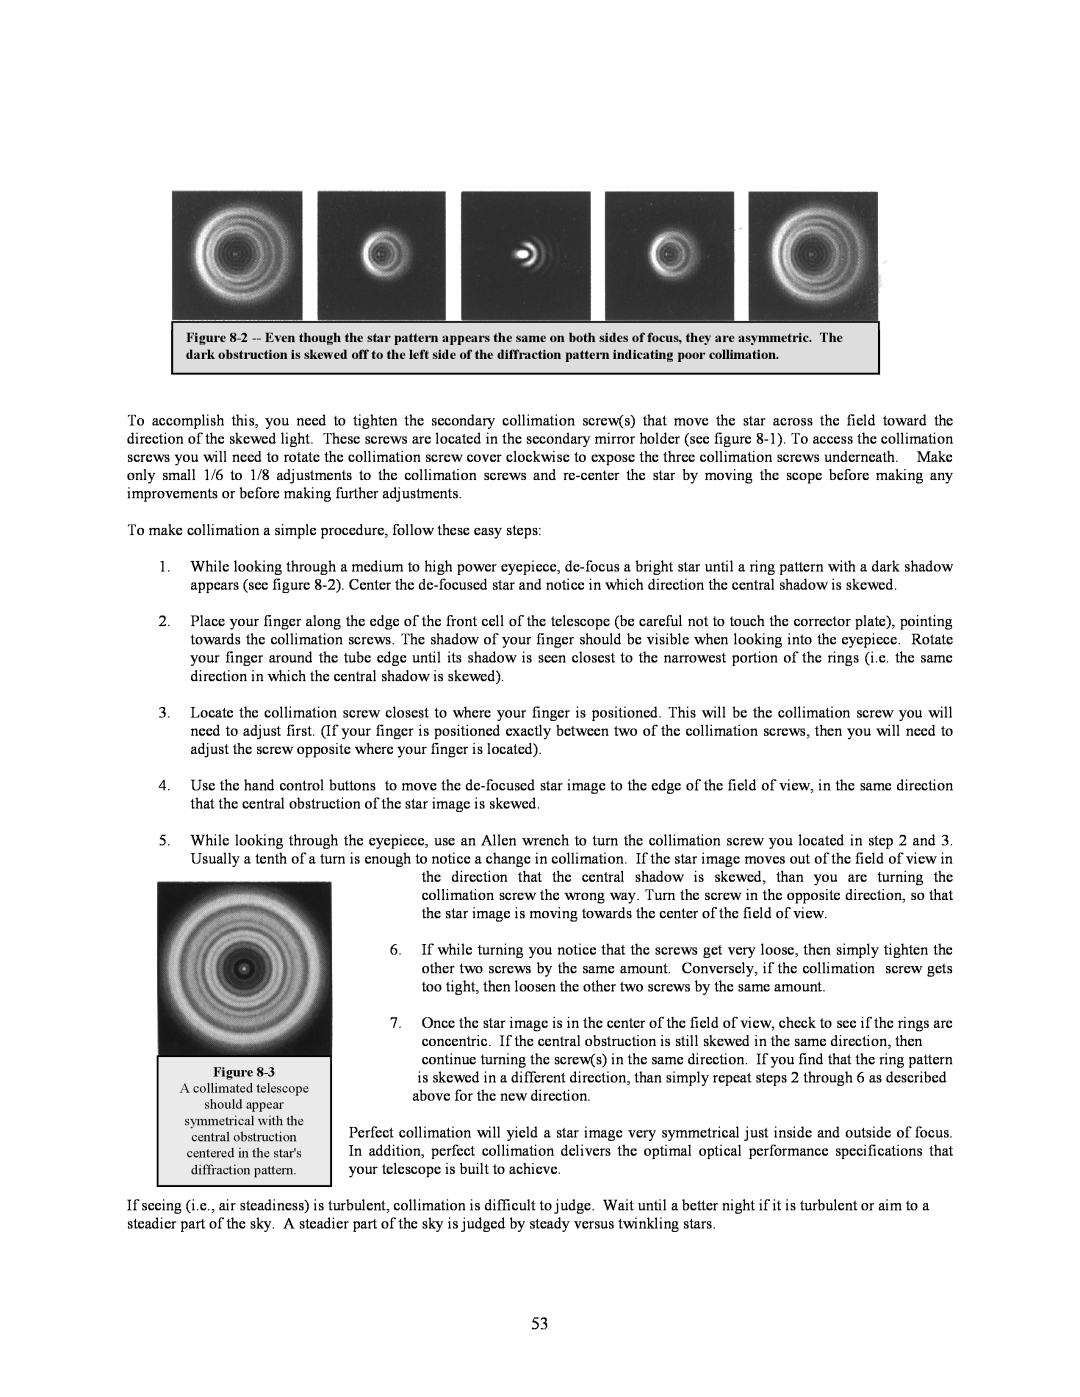 Celestron CGE1100, CGE925, CGE800, CGE1400 manual To make collimation a simple procedure, follow these easy steps 